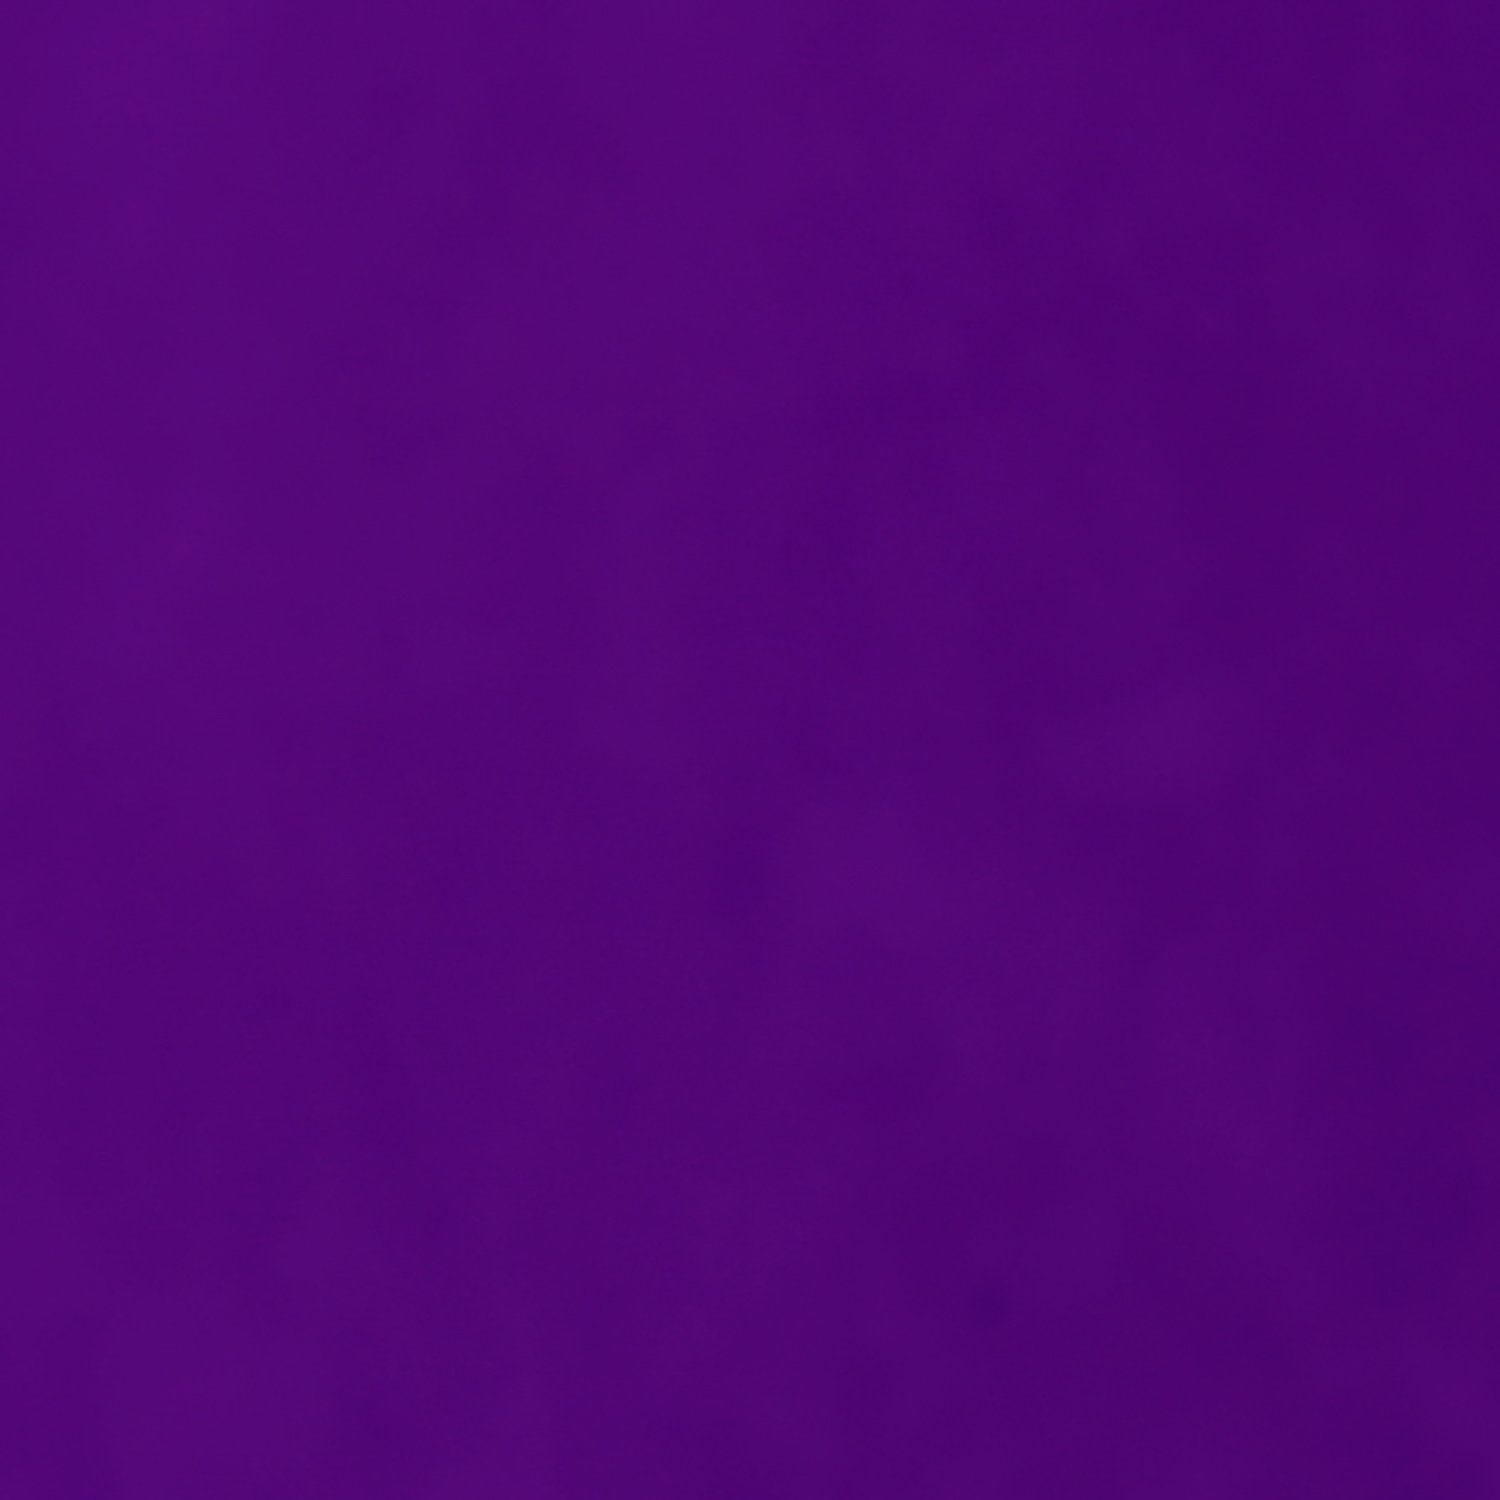 Violet Square Wallpapers